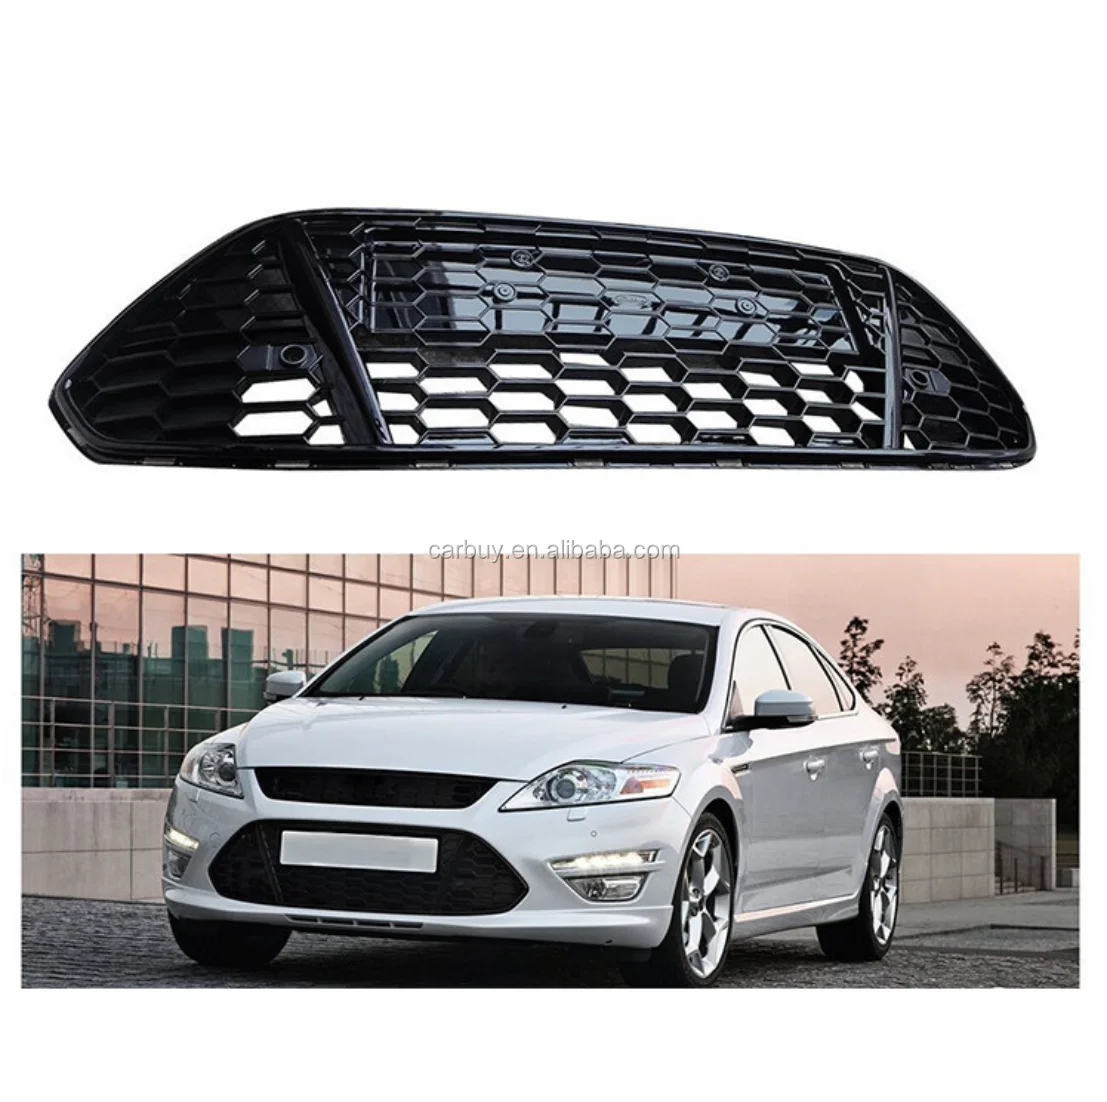 Source Modified front grille for Ford Mondeo upgrade Mustang on m.alibaba.com